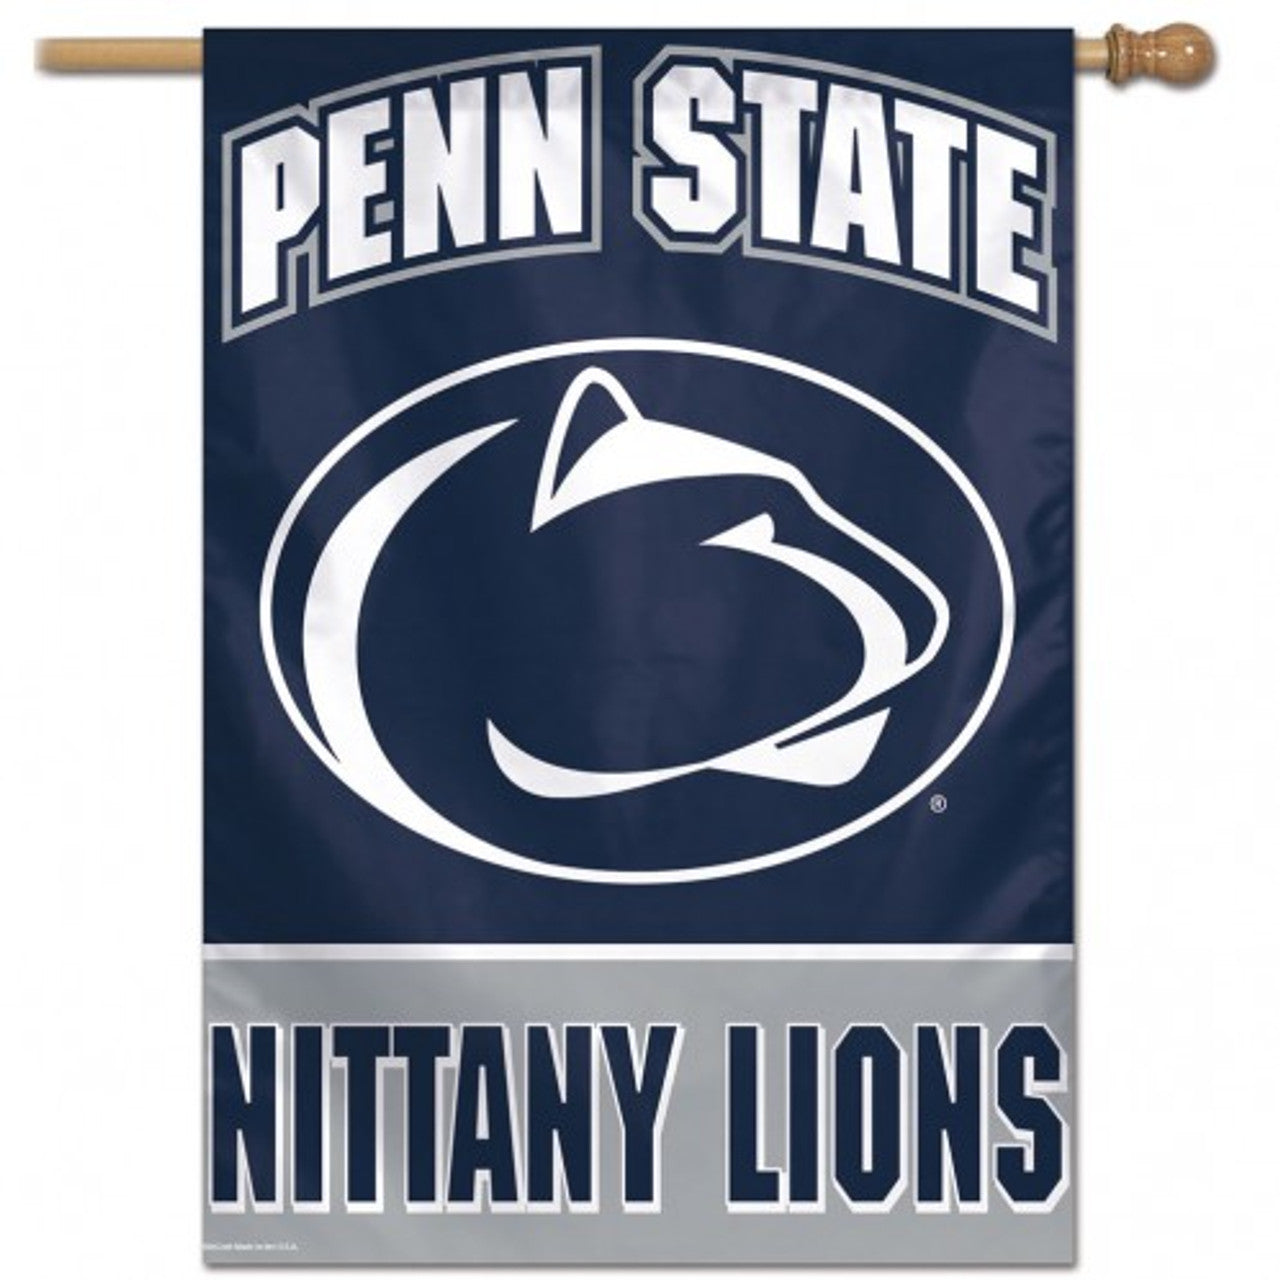 Penn State Nittany Lions 28" x 40" Navy Blue Vertical House Flag/Banner by Wincraft